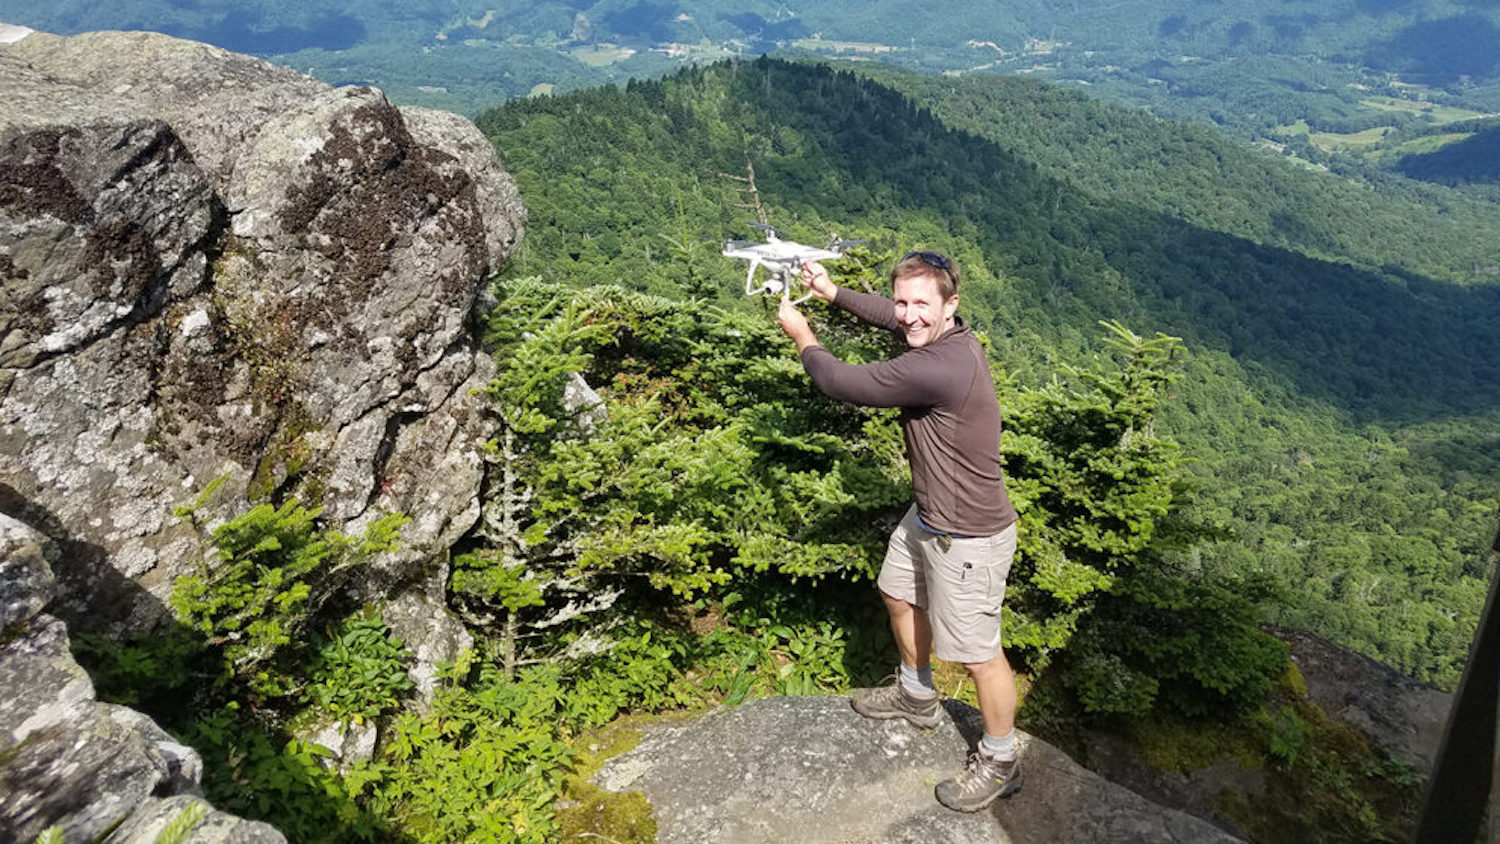 Will Reckling - Keeping Track of Rare Mountaintop Plants with Drones - College of Natural Resources News NC State University